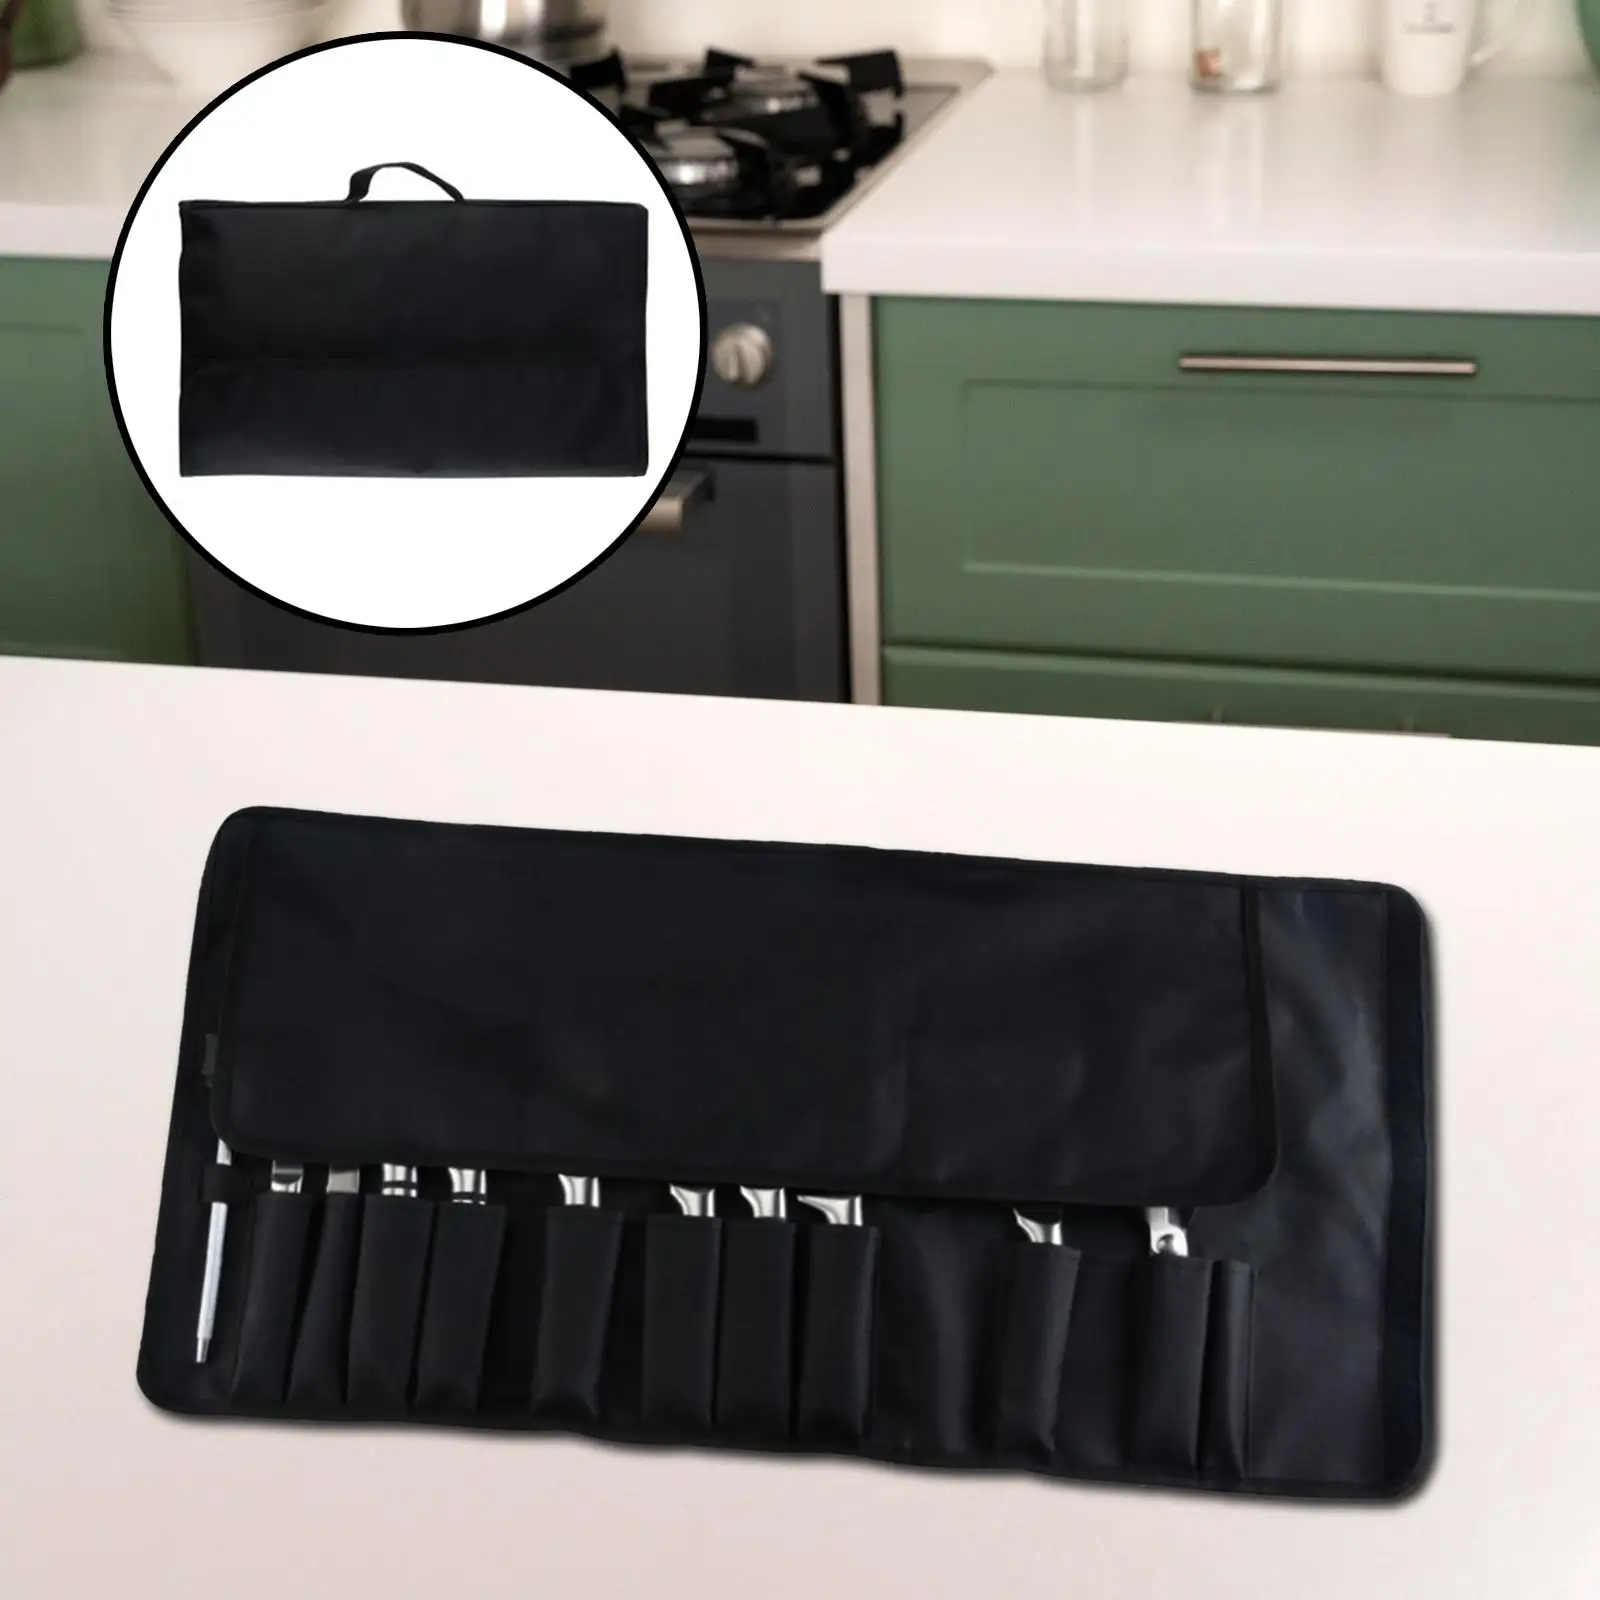 Chef Bag Cooking Tools Storage Tool Bag Roll Bags Storage Bag Pouch Holders Carry Case for Outdoor Kitchen Travel Home Gifts